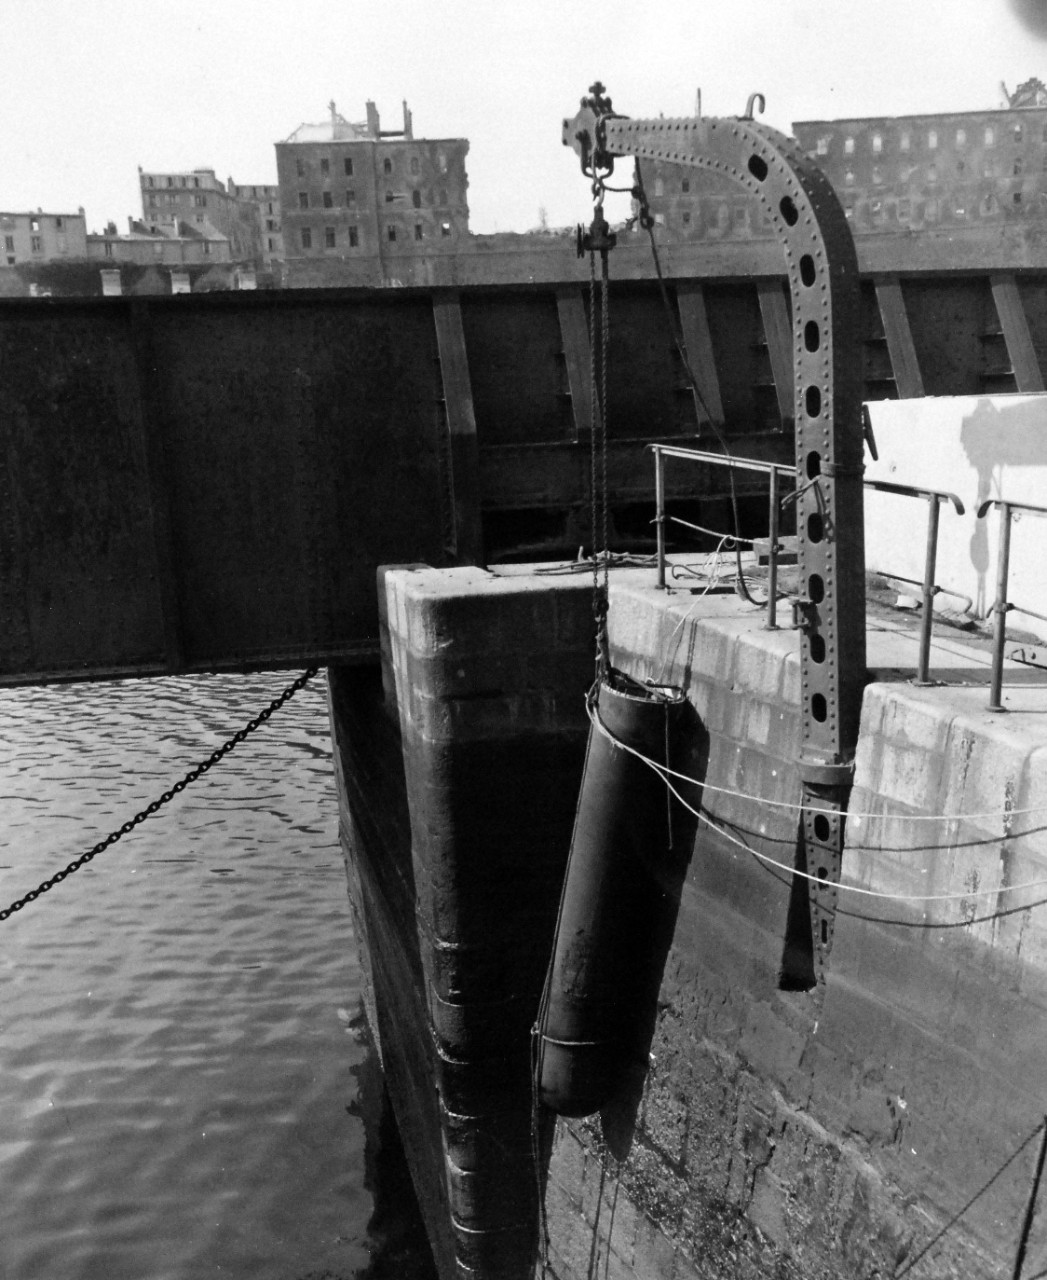 80-G-257439:  Invasion of Southern France, Brest, August-September 1944.   A torpedo warhead hanging against the wall of a basin section in the inner harbor of Brest, France.  It was with such warheads that the Germans demolished harbor installations, 27 September 1944.  (10/28/2014).